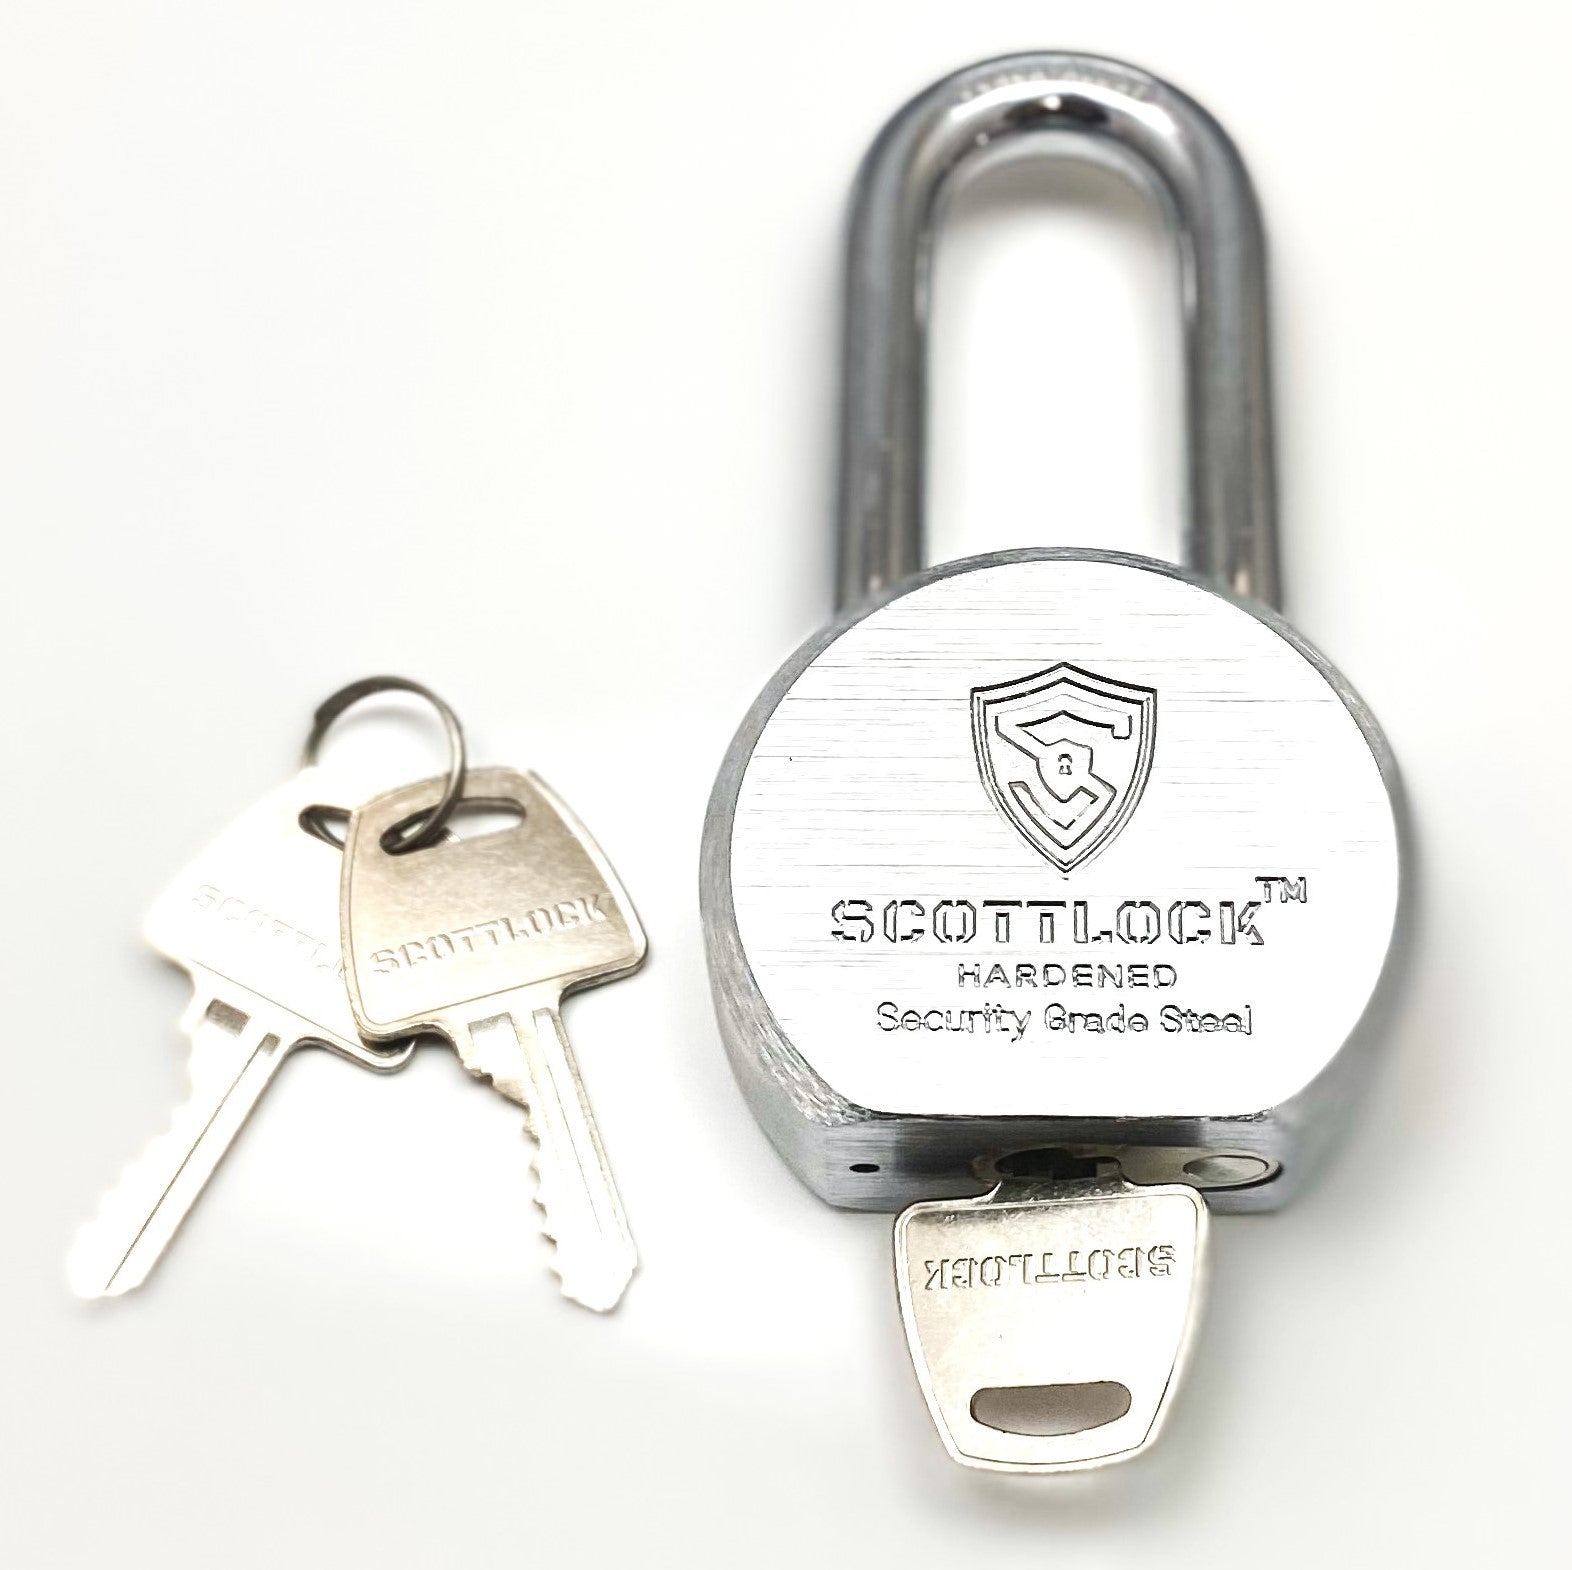 This re-keyable padlock is made up of a hardened steel body and cut resistant Boron shackle!  It is considered "industrial strength" and comes with three keys.  Excellent for outdoor uses due to a weather resistant zinc coating.  The inside shackle clearance is 1" wide by 2.25" high.  The shackle diameter is 11mm.   